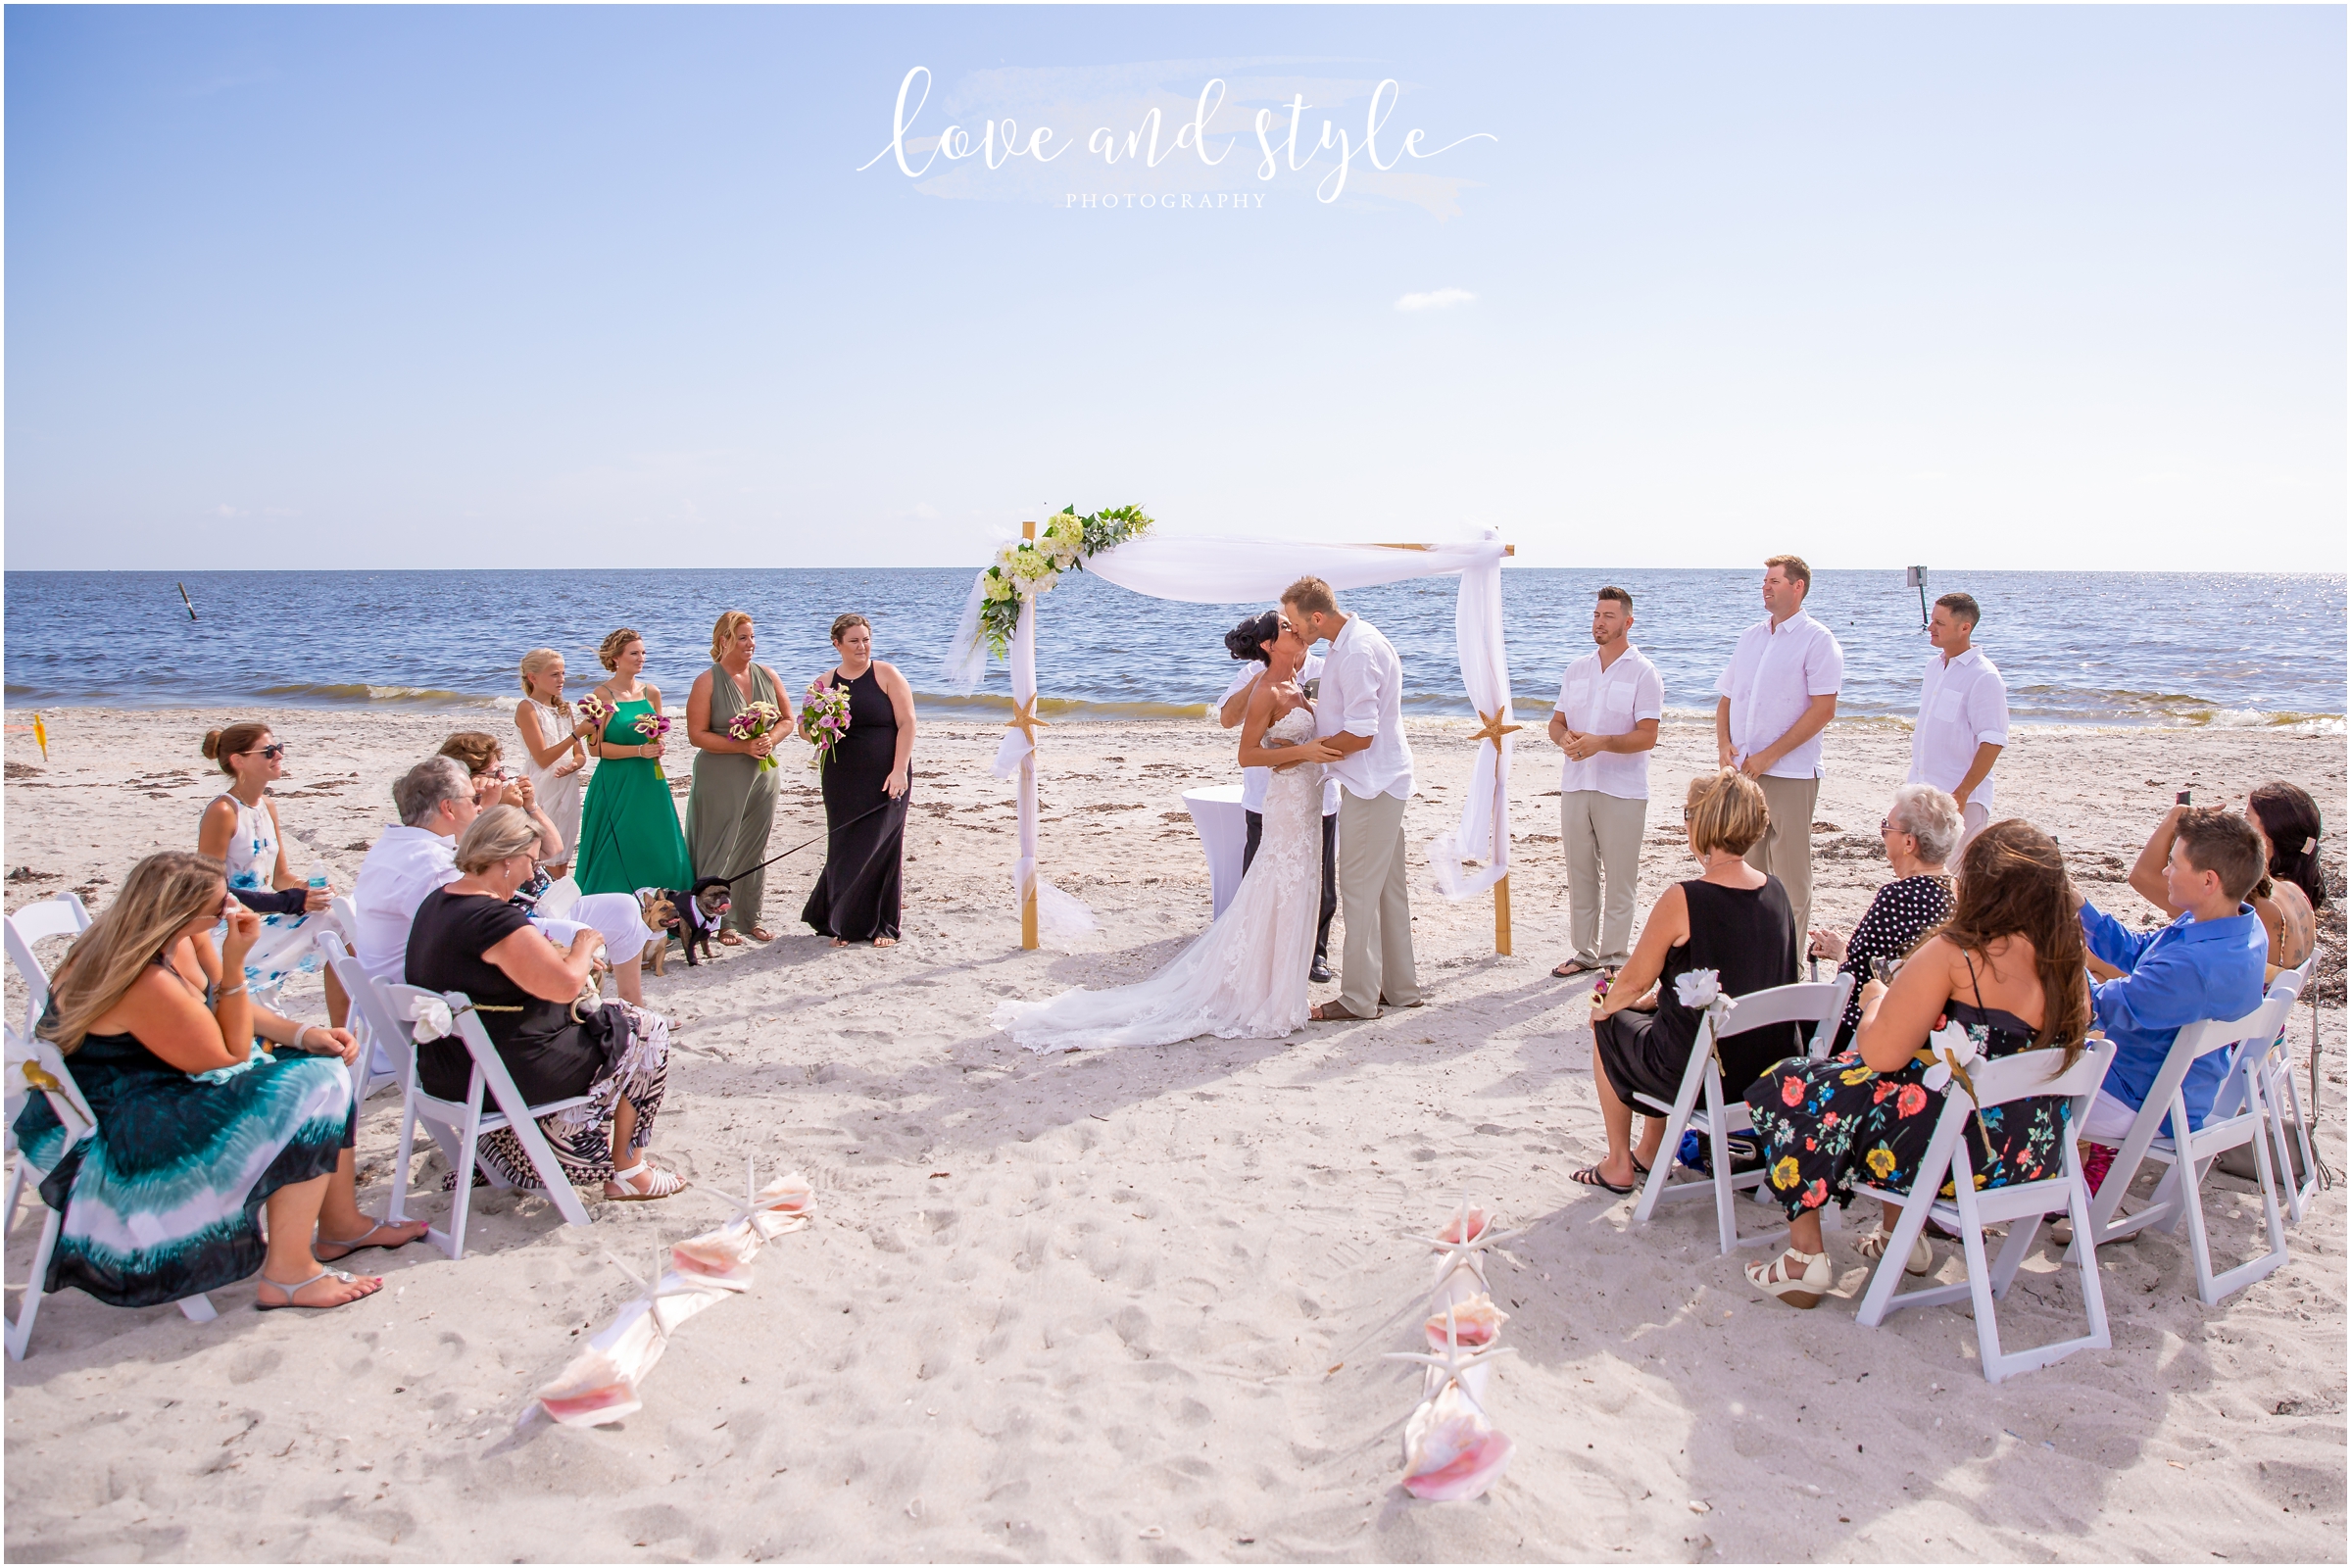 Englewood Beach Wedding by The Waverly of the beach ceremony